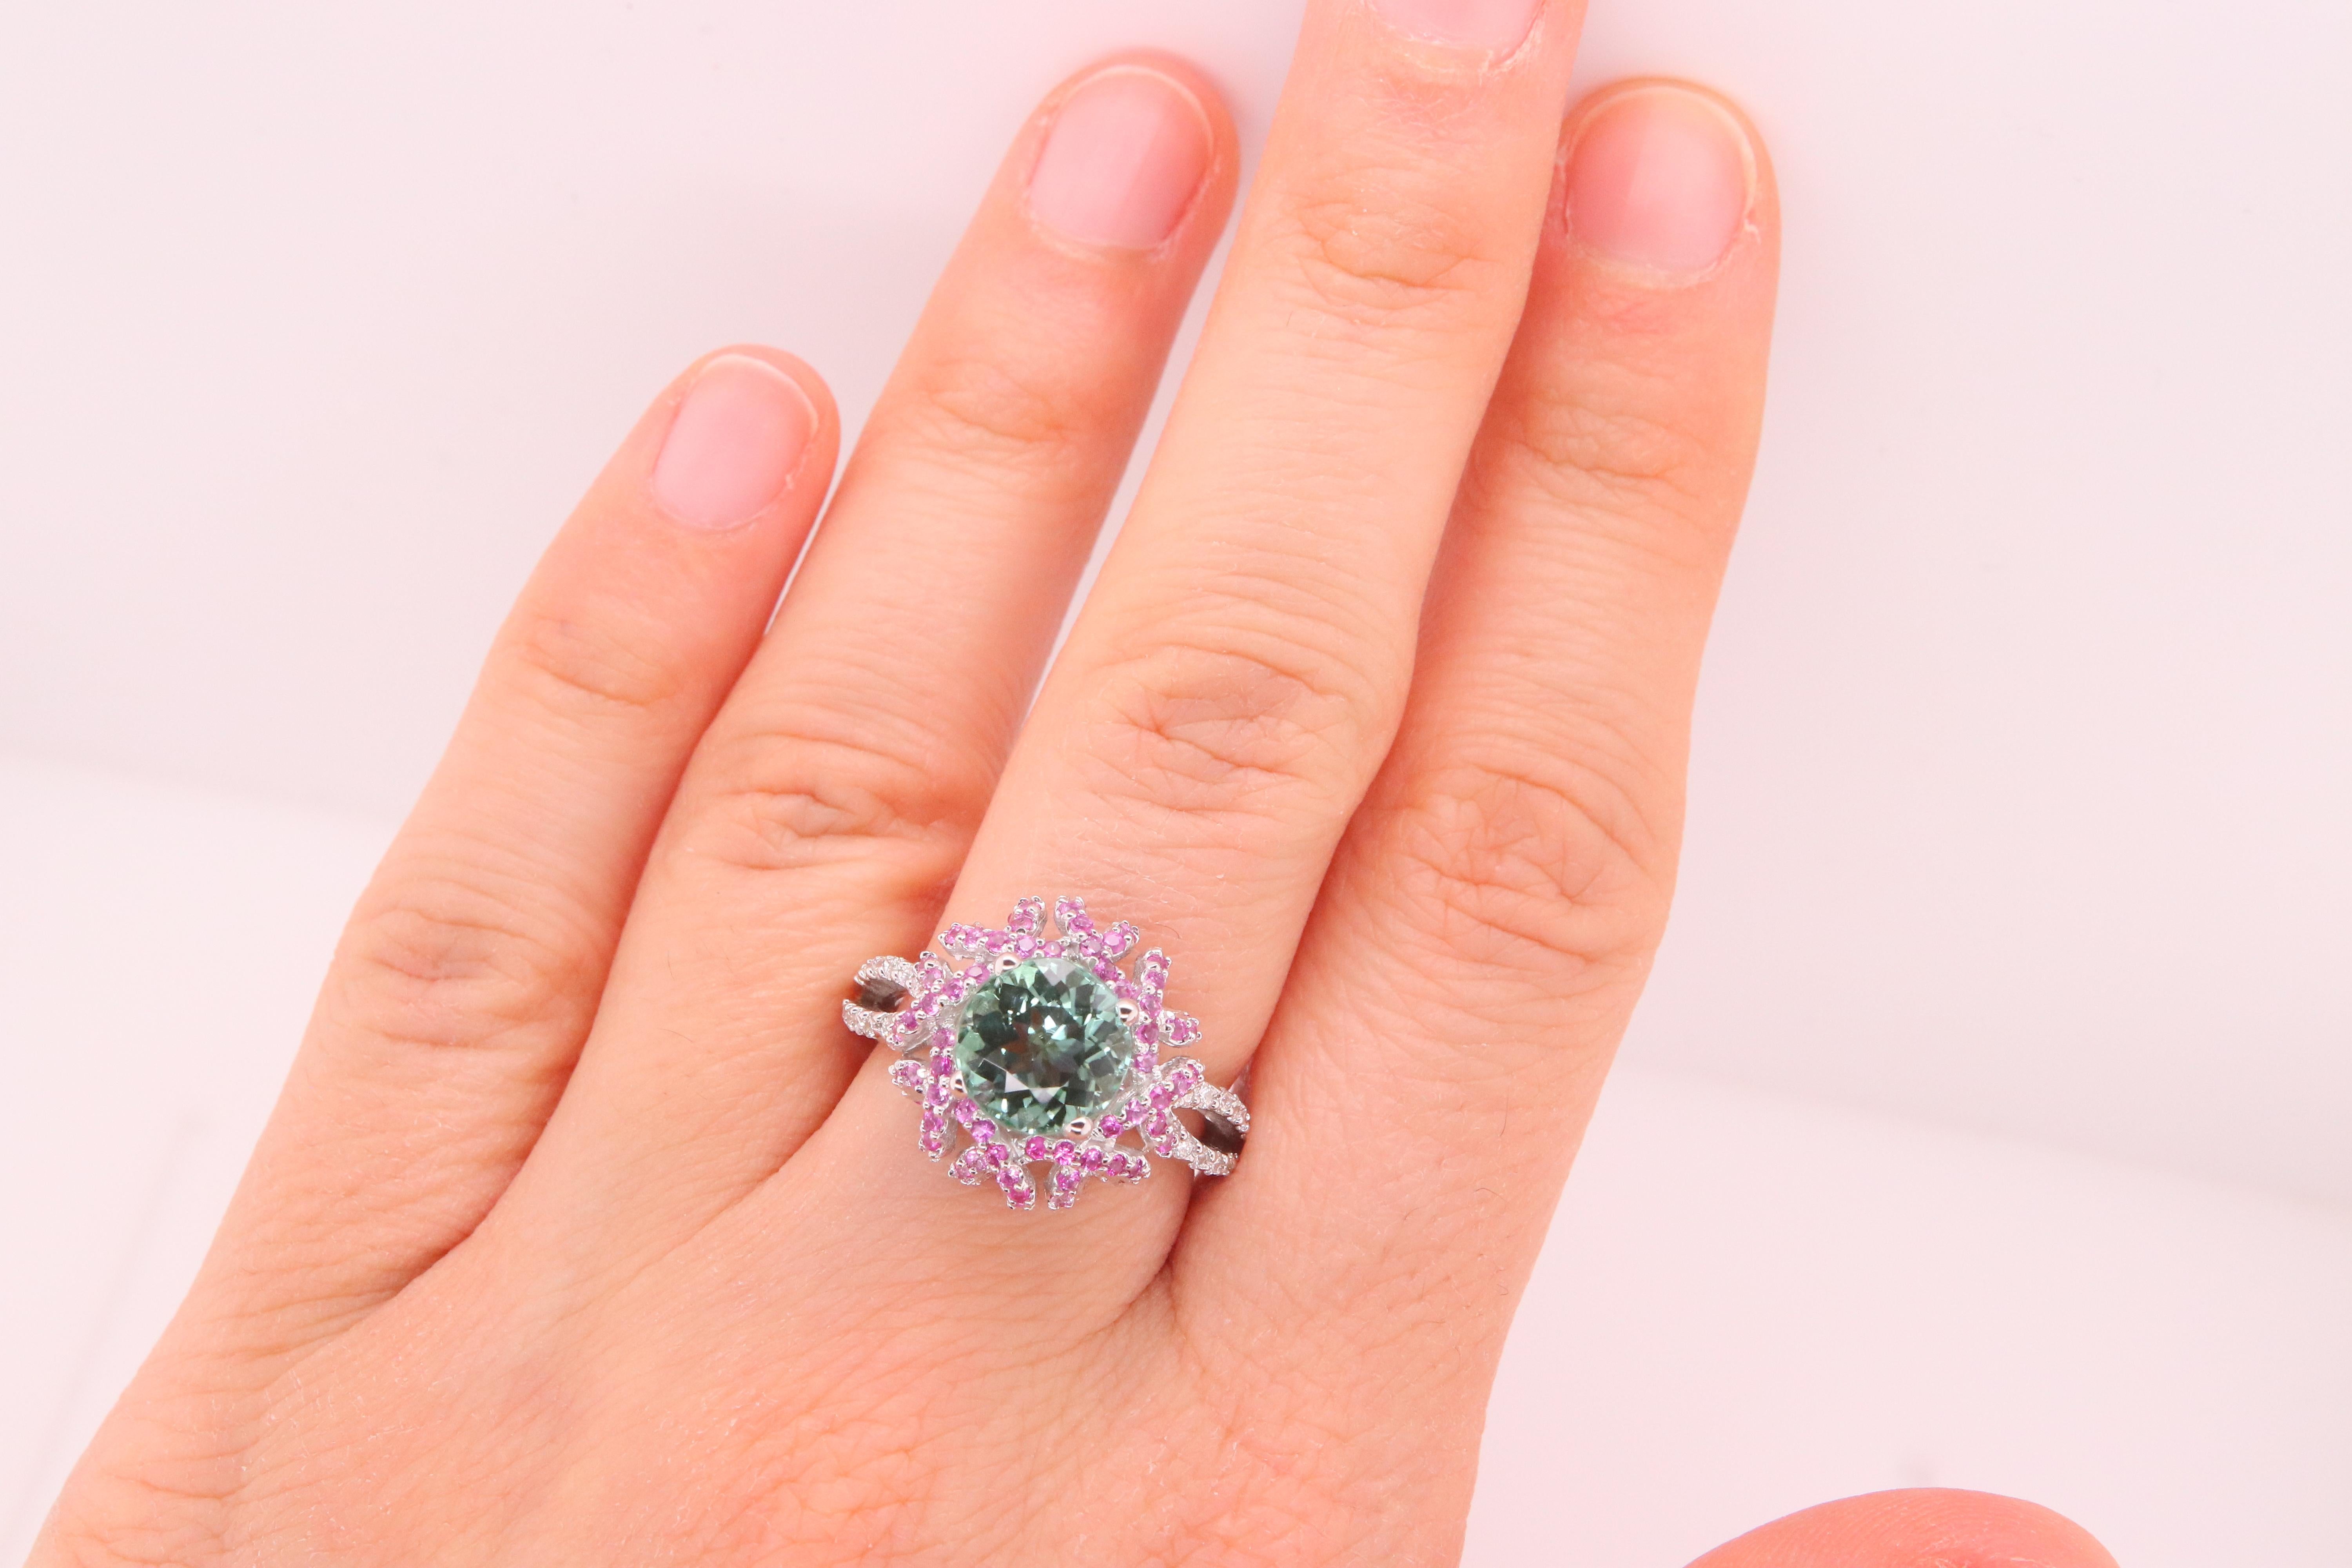 Material: 18k White Gold 
Center Stone Details: 1 Round Green Tourmaline at 2.4 Carats - 8mm
Mounting Stone Details: 96 Round Pink Sapphires at 0.70 Carats
Diamond Details: 24 Brilliant Round White Diamonds at Approximately 0.20 Carats - Clarity: SI